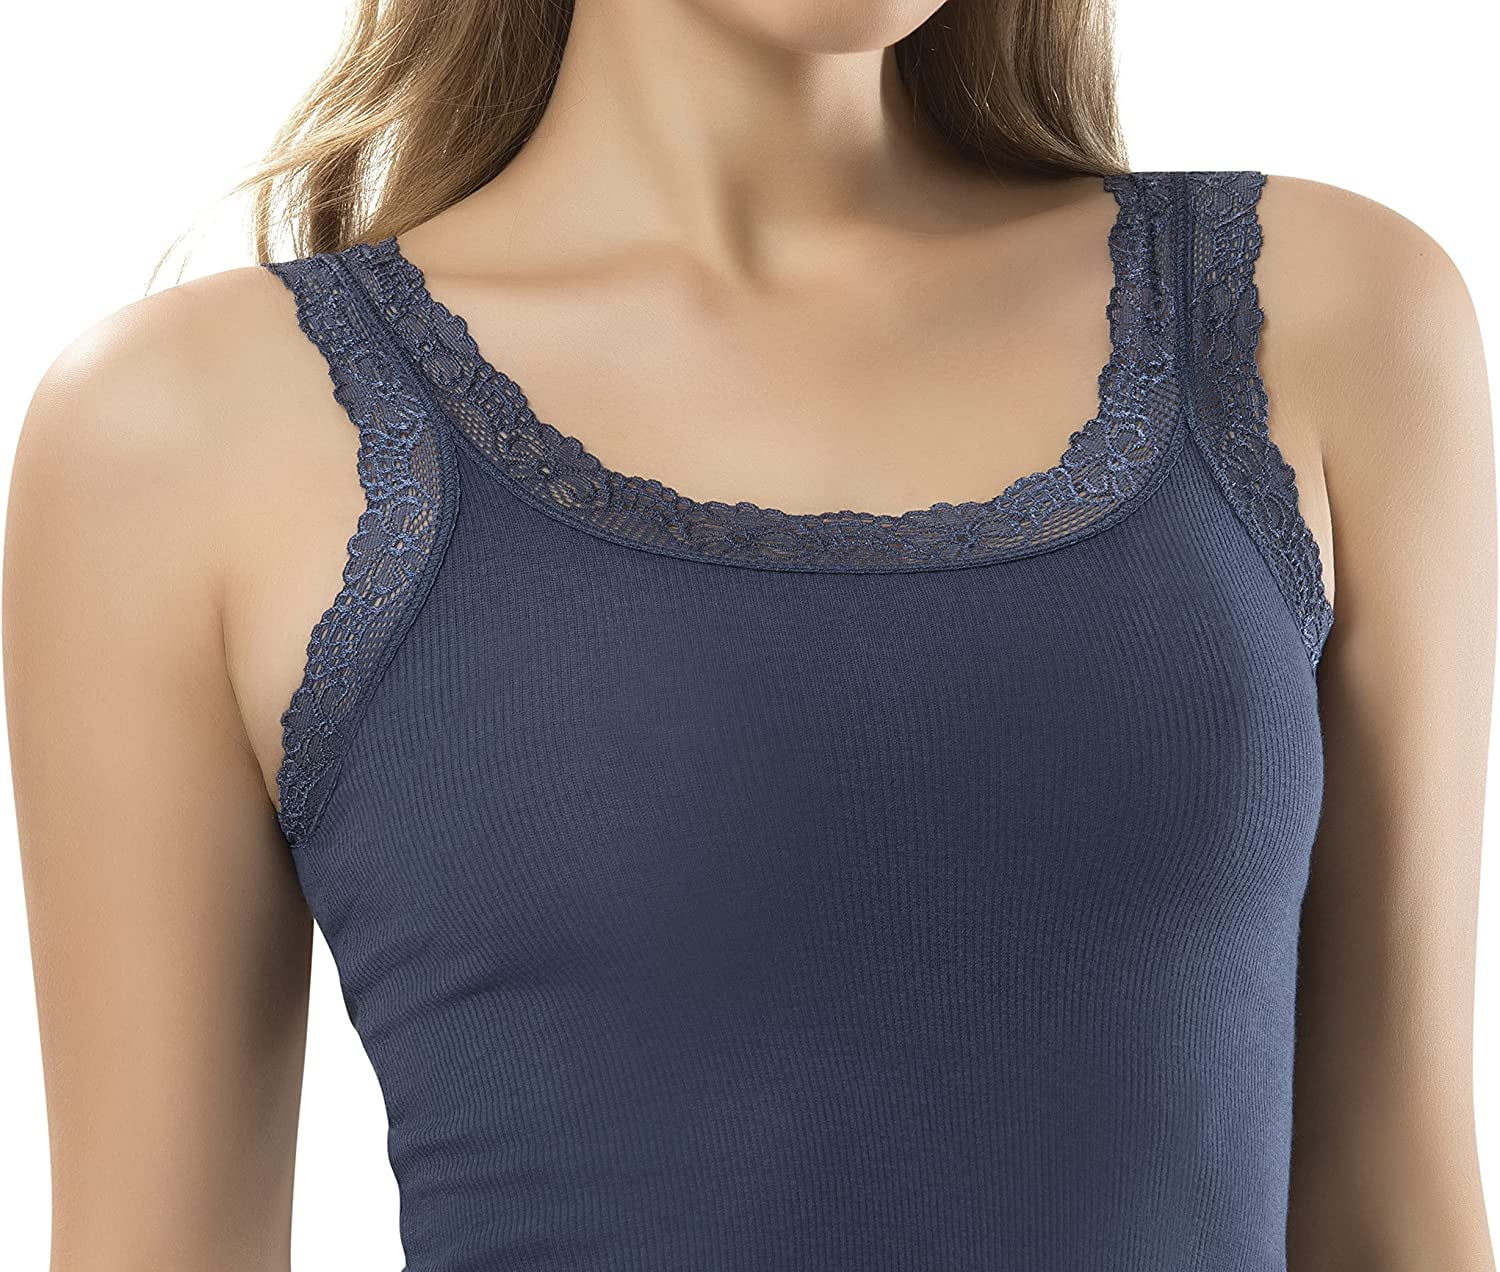  VAVONNE Lace Camisole Tank Tops For Women, Soft Stretch  Ribbed Cotton Cami Shirt